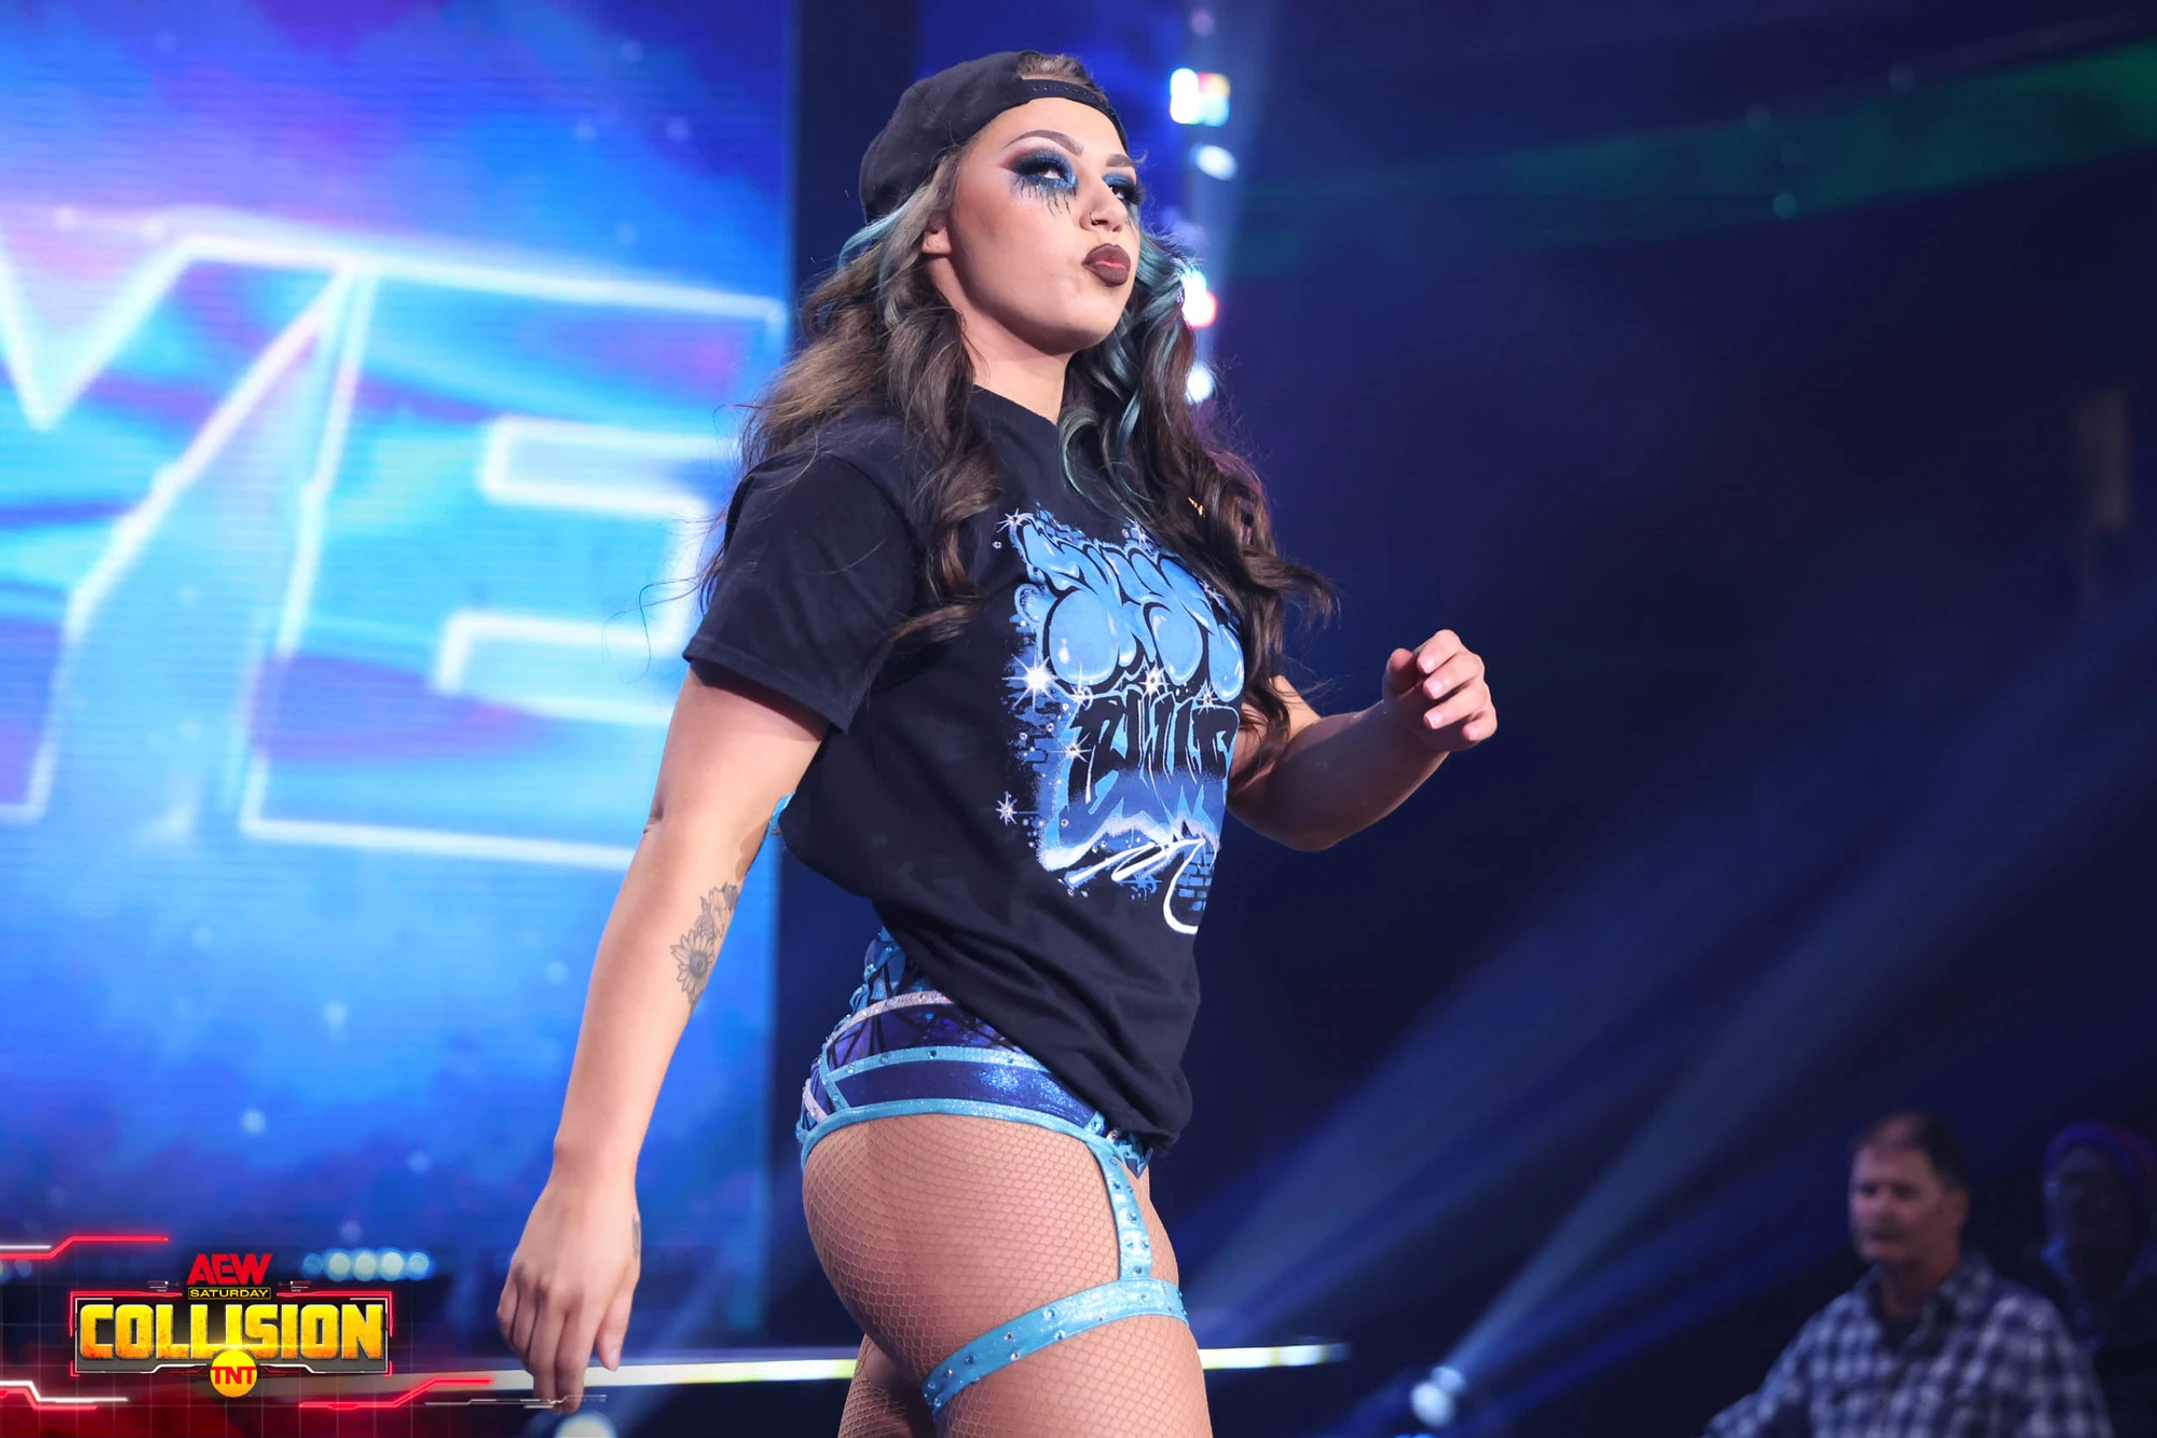 Highlights of Skye Blue’s performances on TNA Xplosion and pre-sale details for Collision, along with updates on AEW Games and TNA Impact.